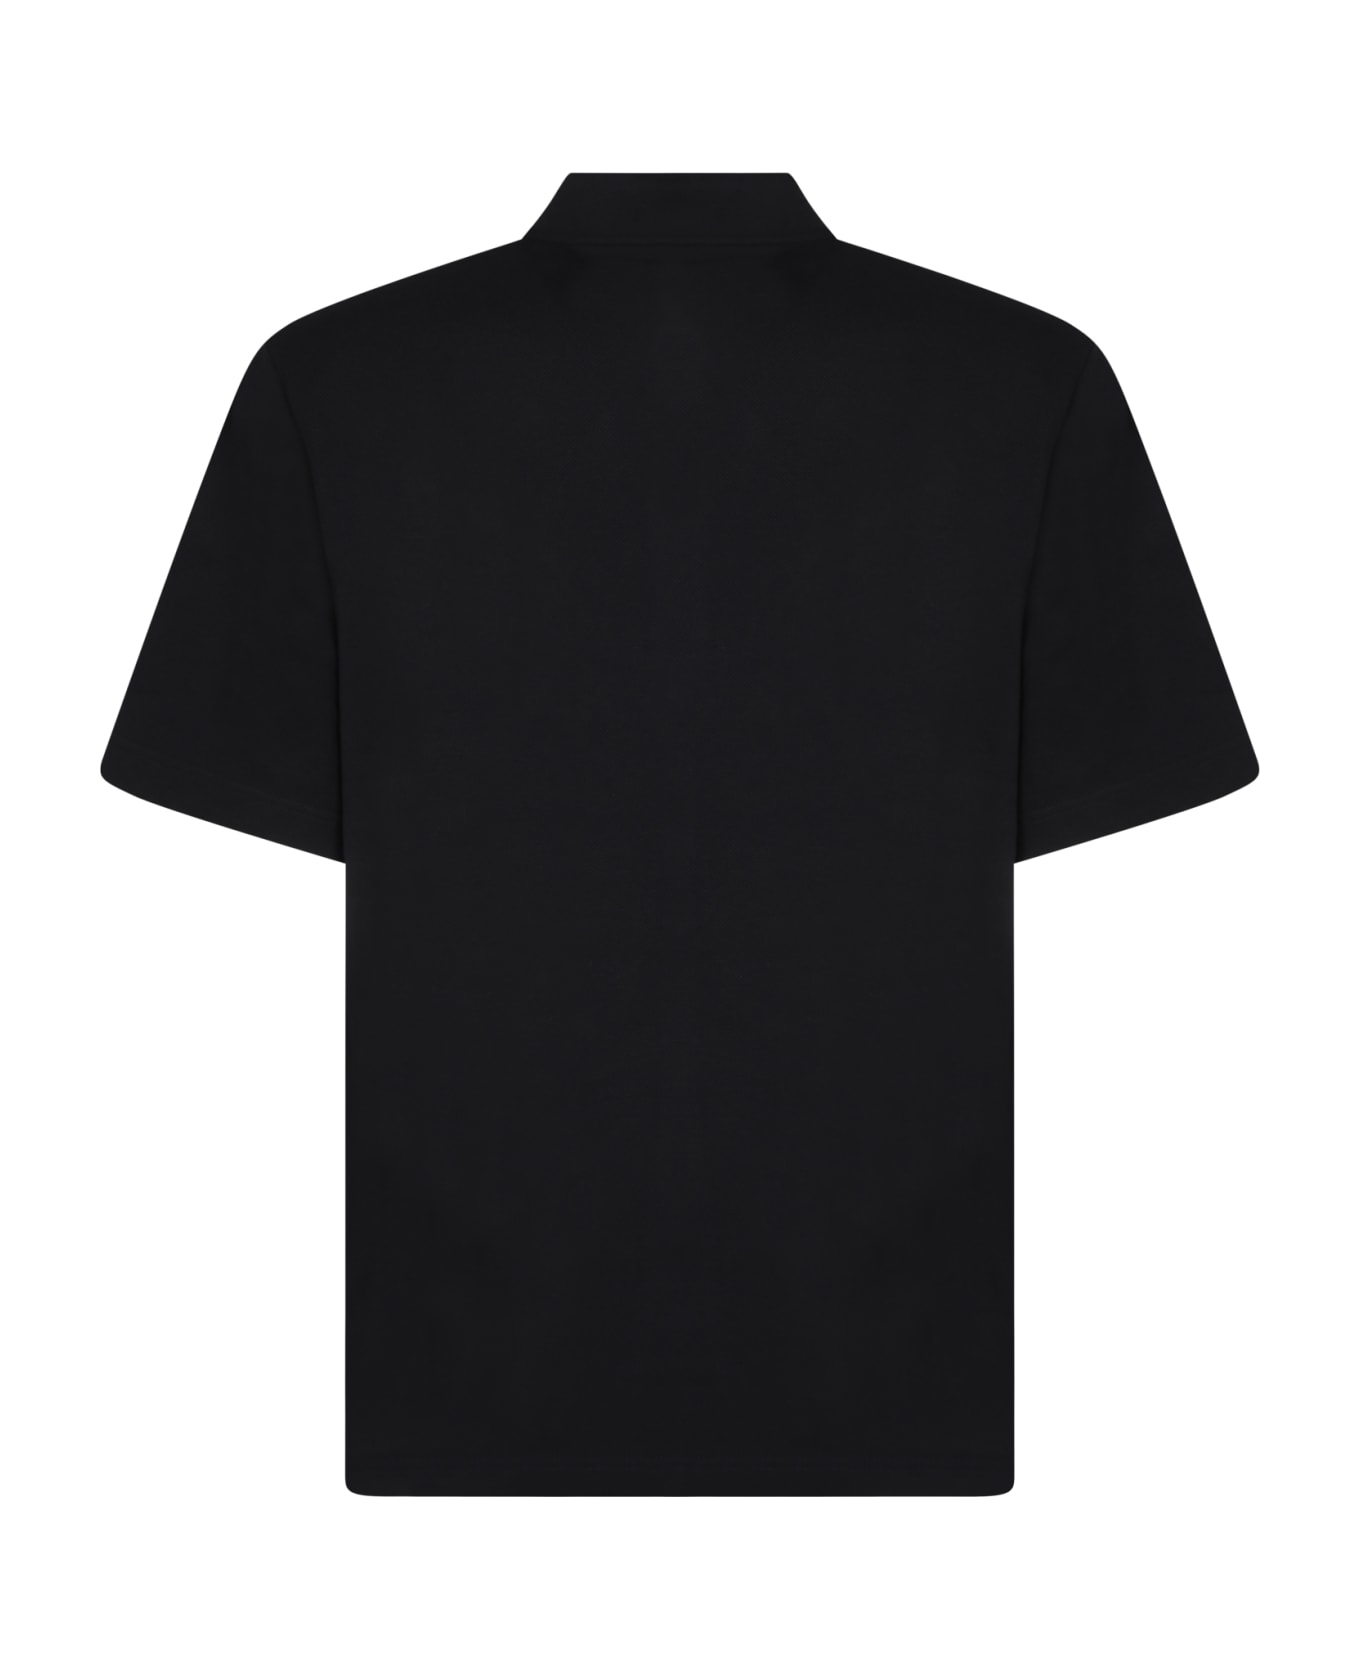 Burberry Logo Embroidered Short Sleeved Polo Shirt - Black ポロシャツ